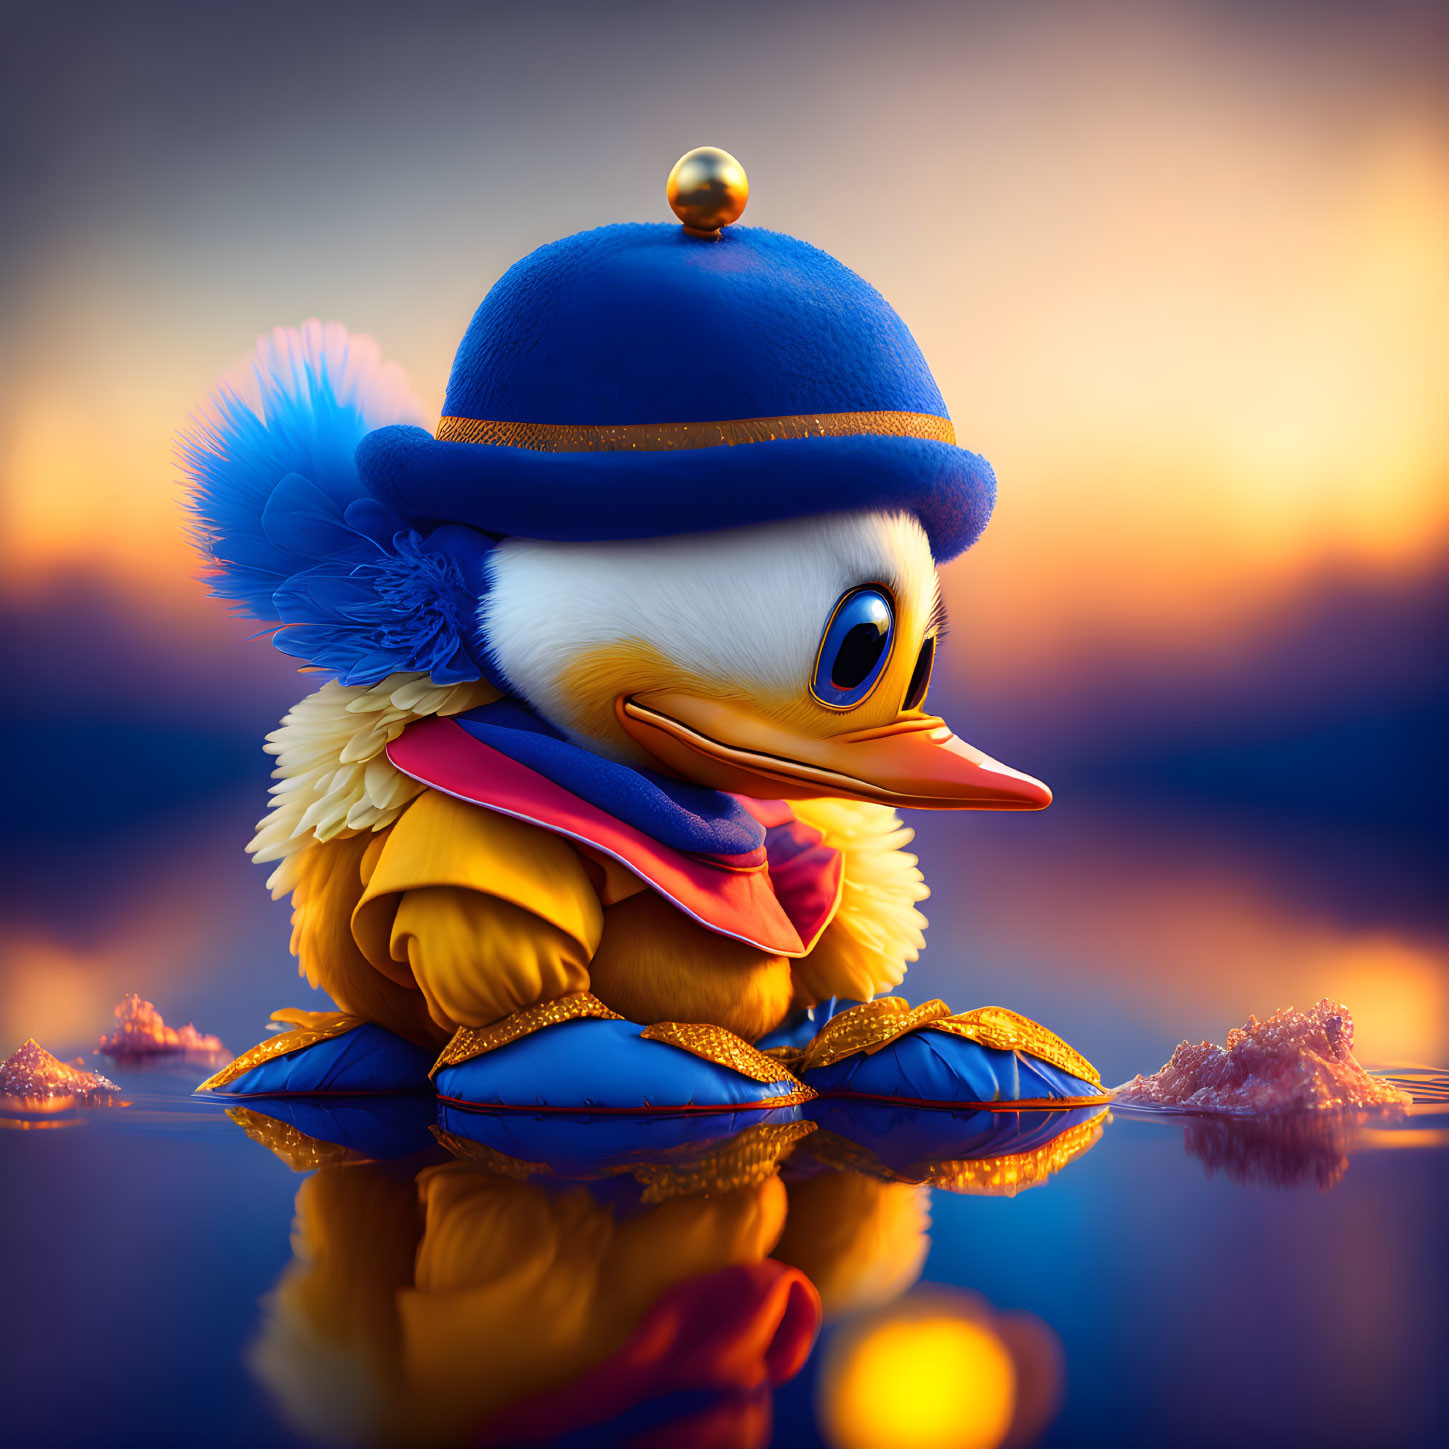 Cartoon duckling in blue hat at sunset by water